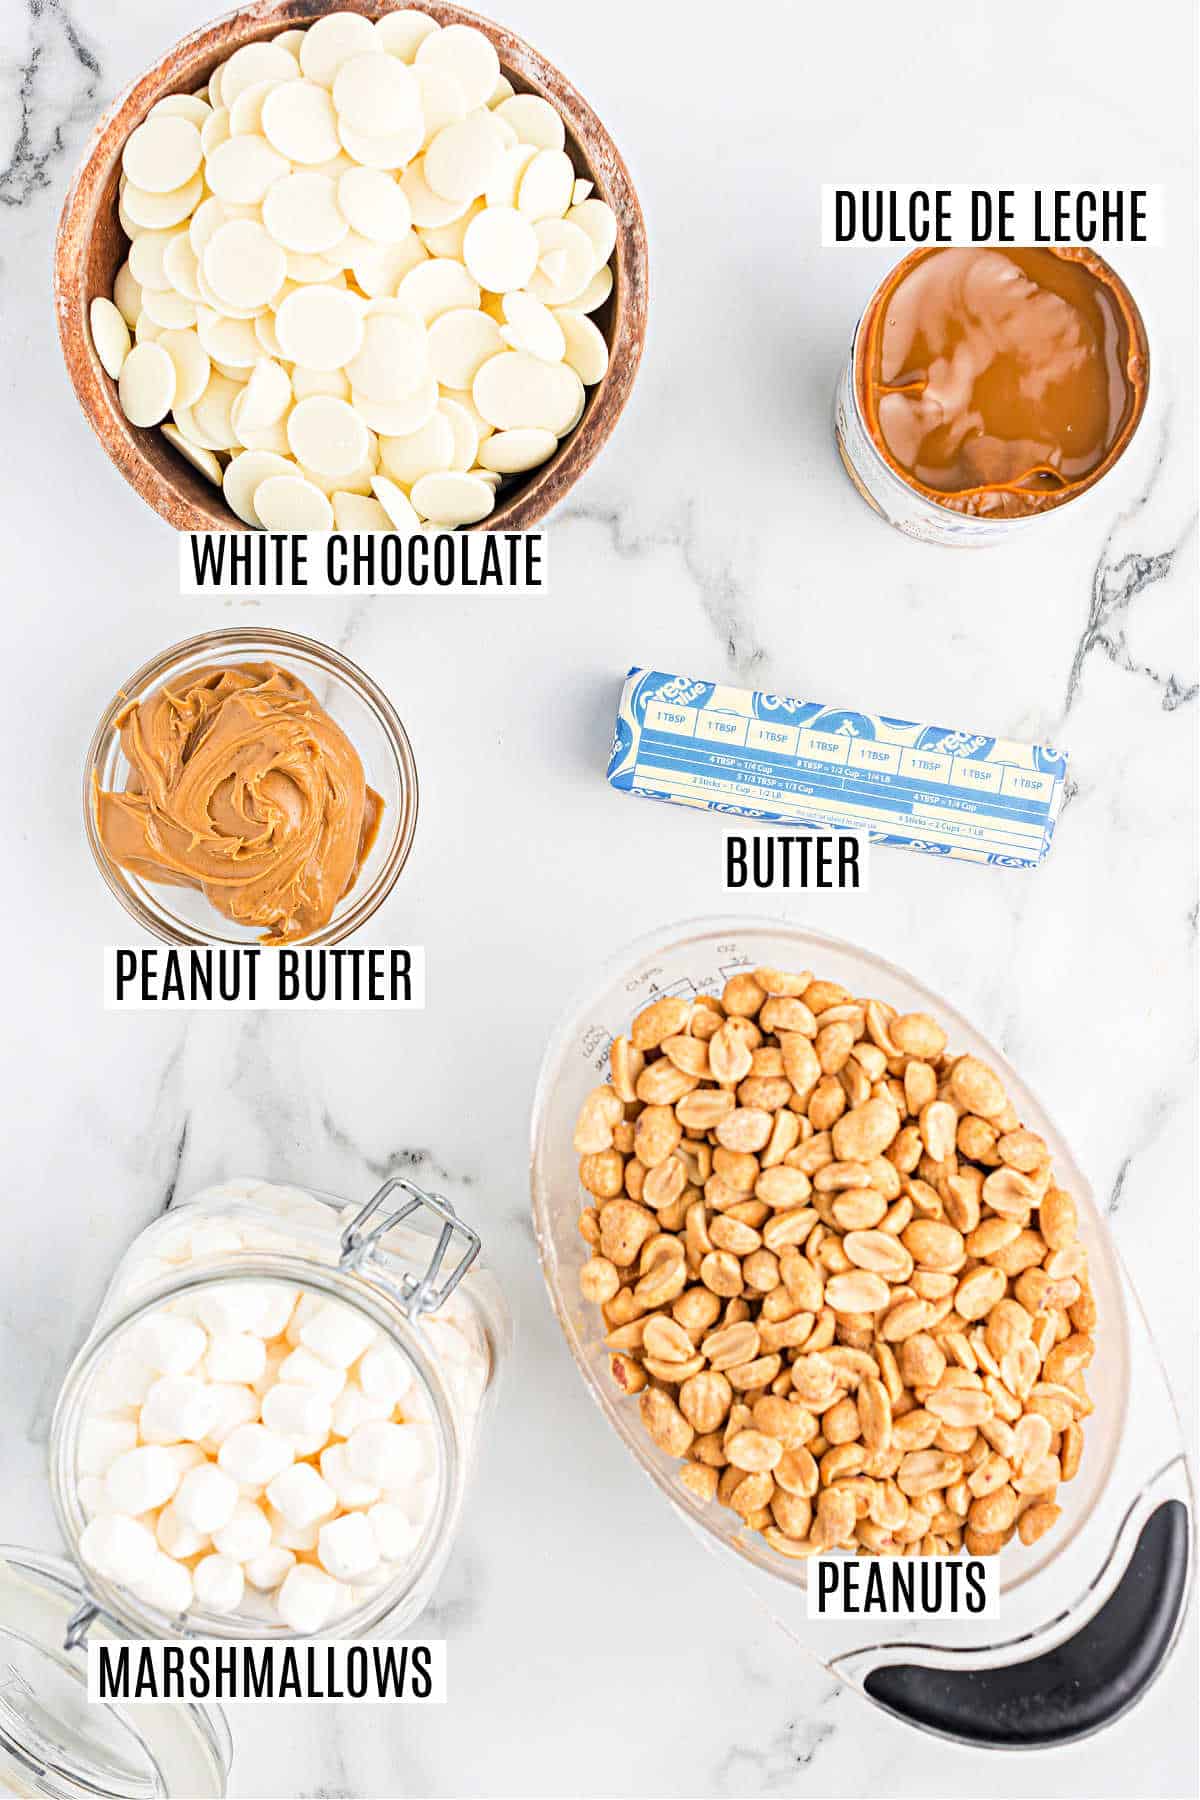 Ingredients needed to make payday candy.